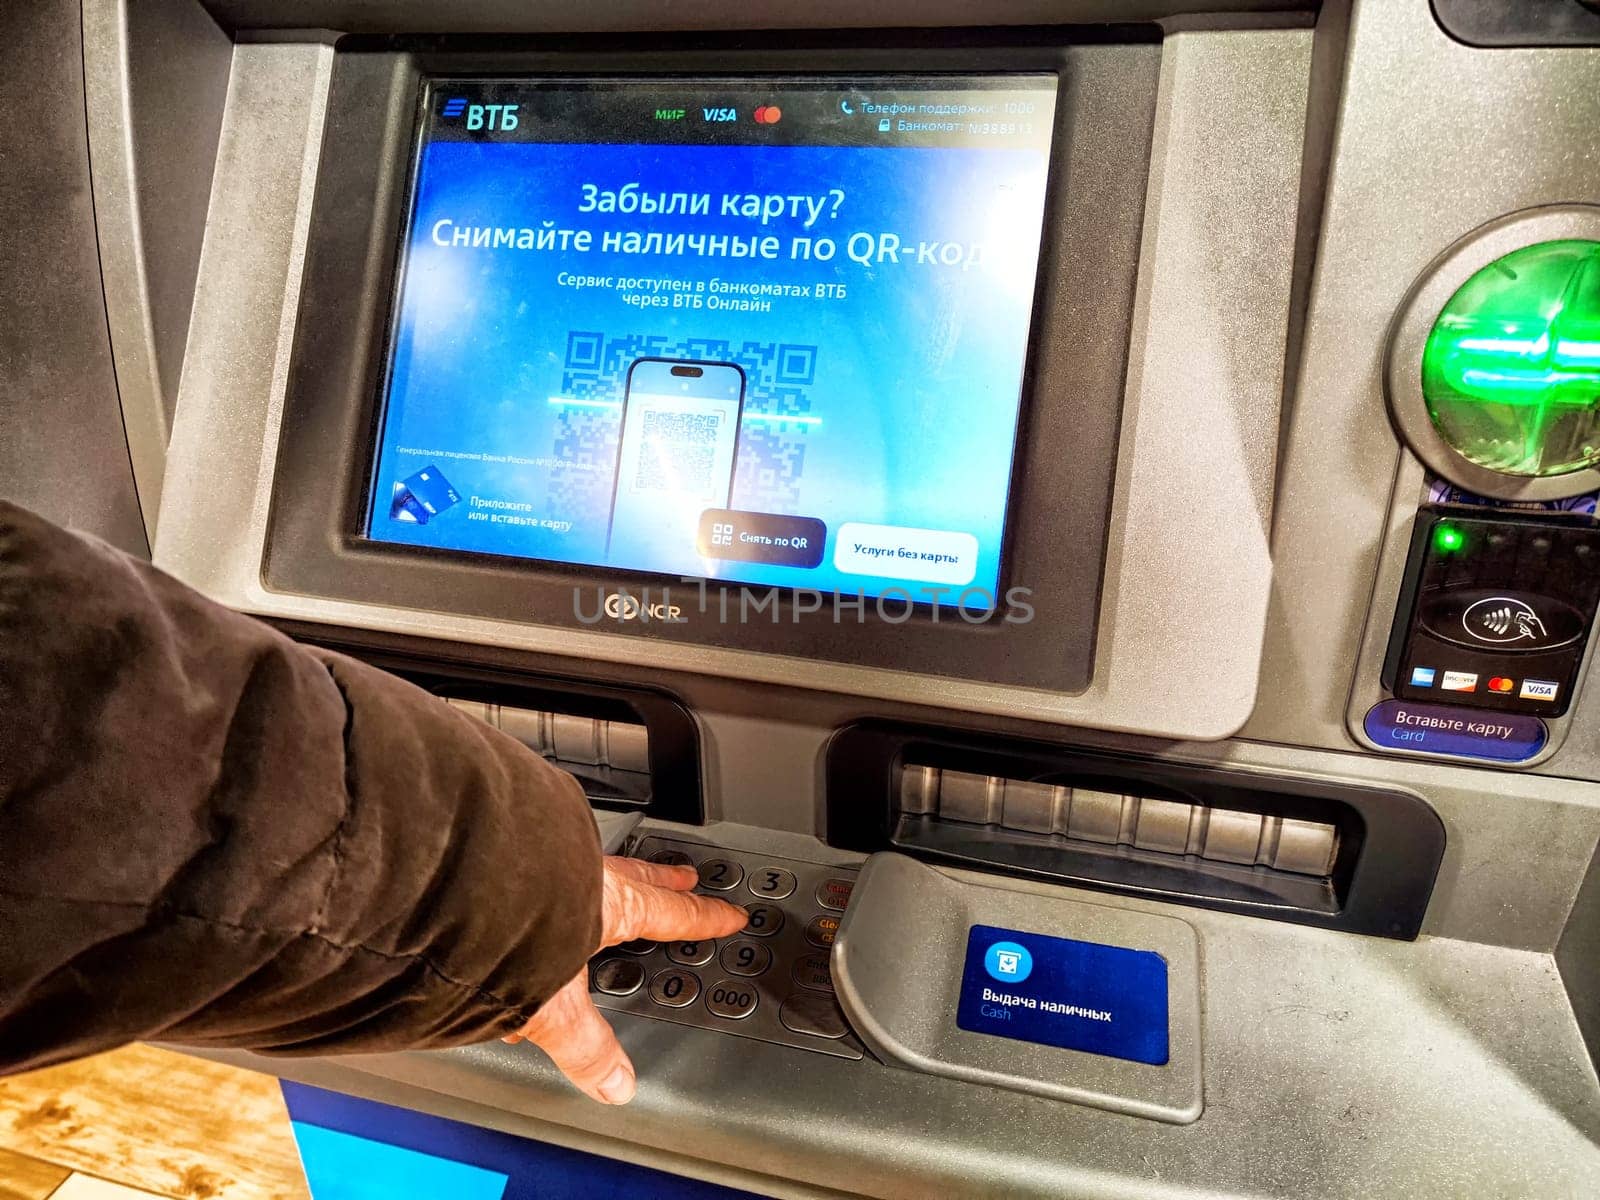 Kirov, Russia - April 28, 2024: Person Withdrawing Cash From ATM in Russia. Hand pressing button on an ATM with a Russian language screen